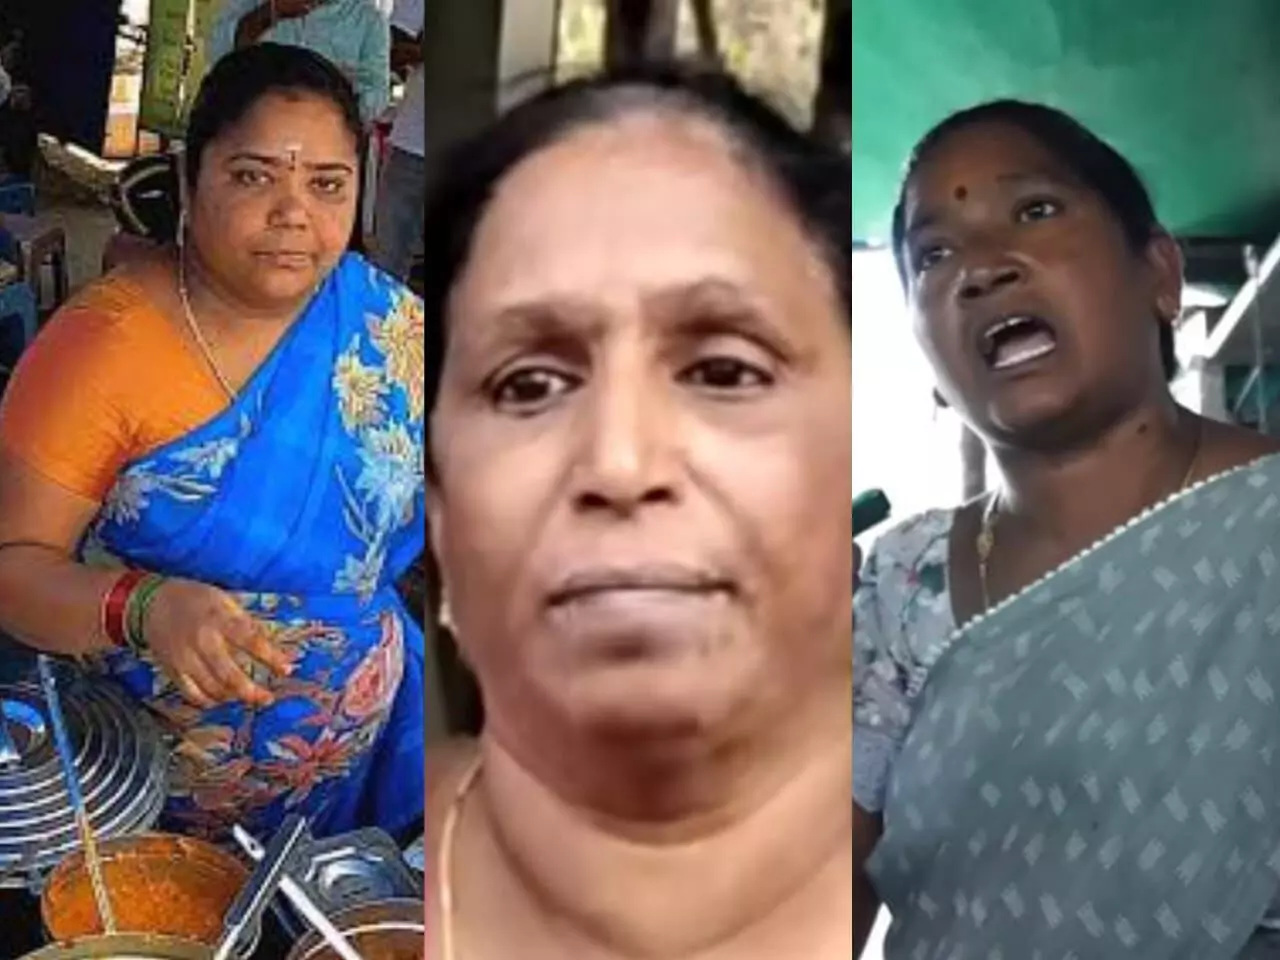 Eateries near Kumari Auntys stall urge vloggers, YouTubers to refrain from filming amid controversy, business downturn